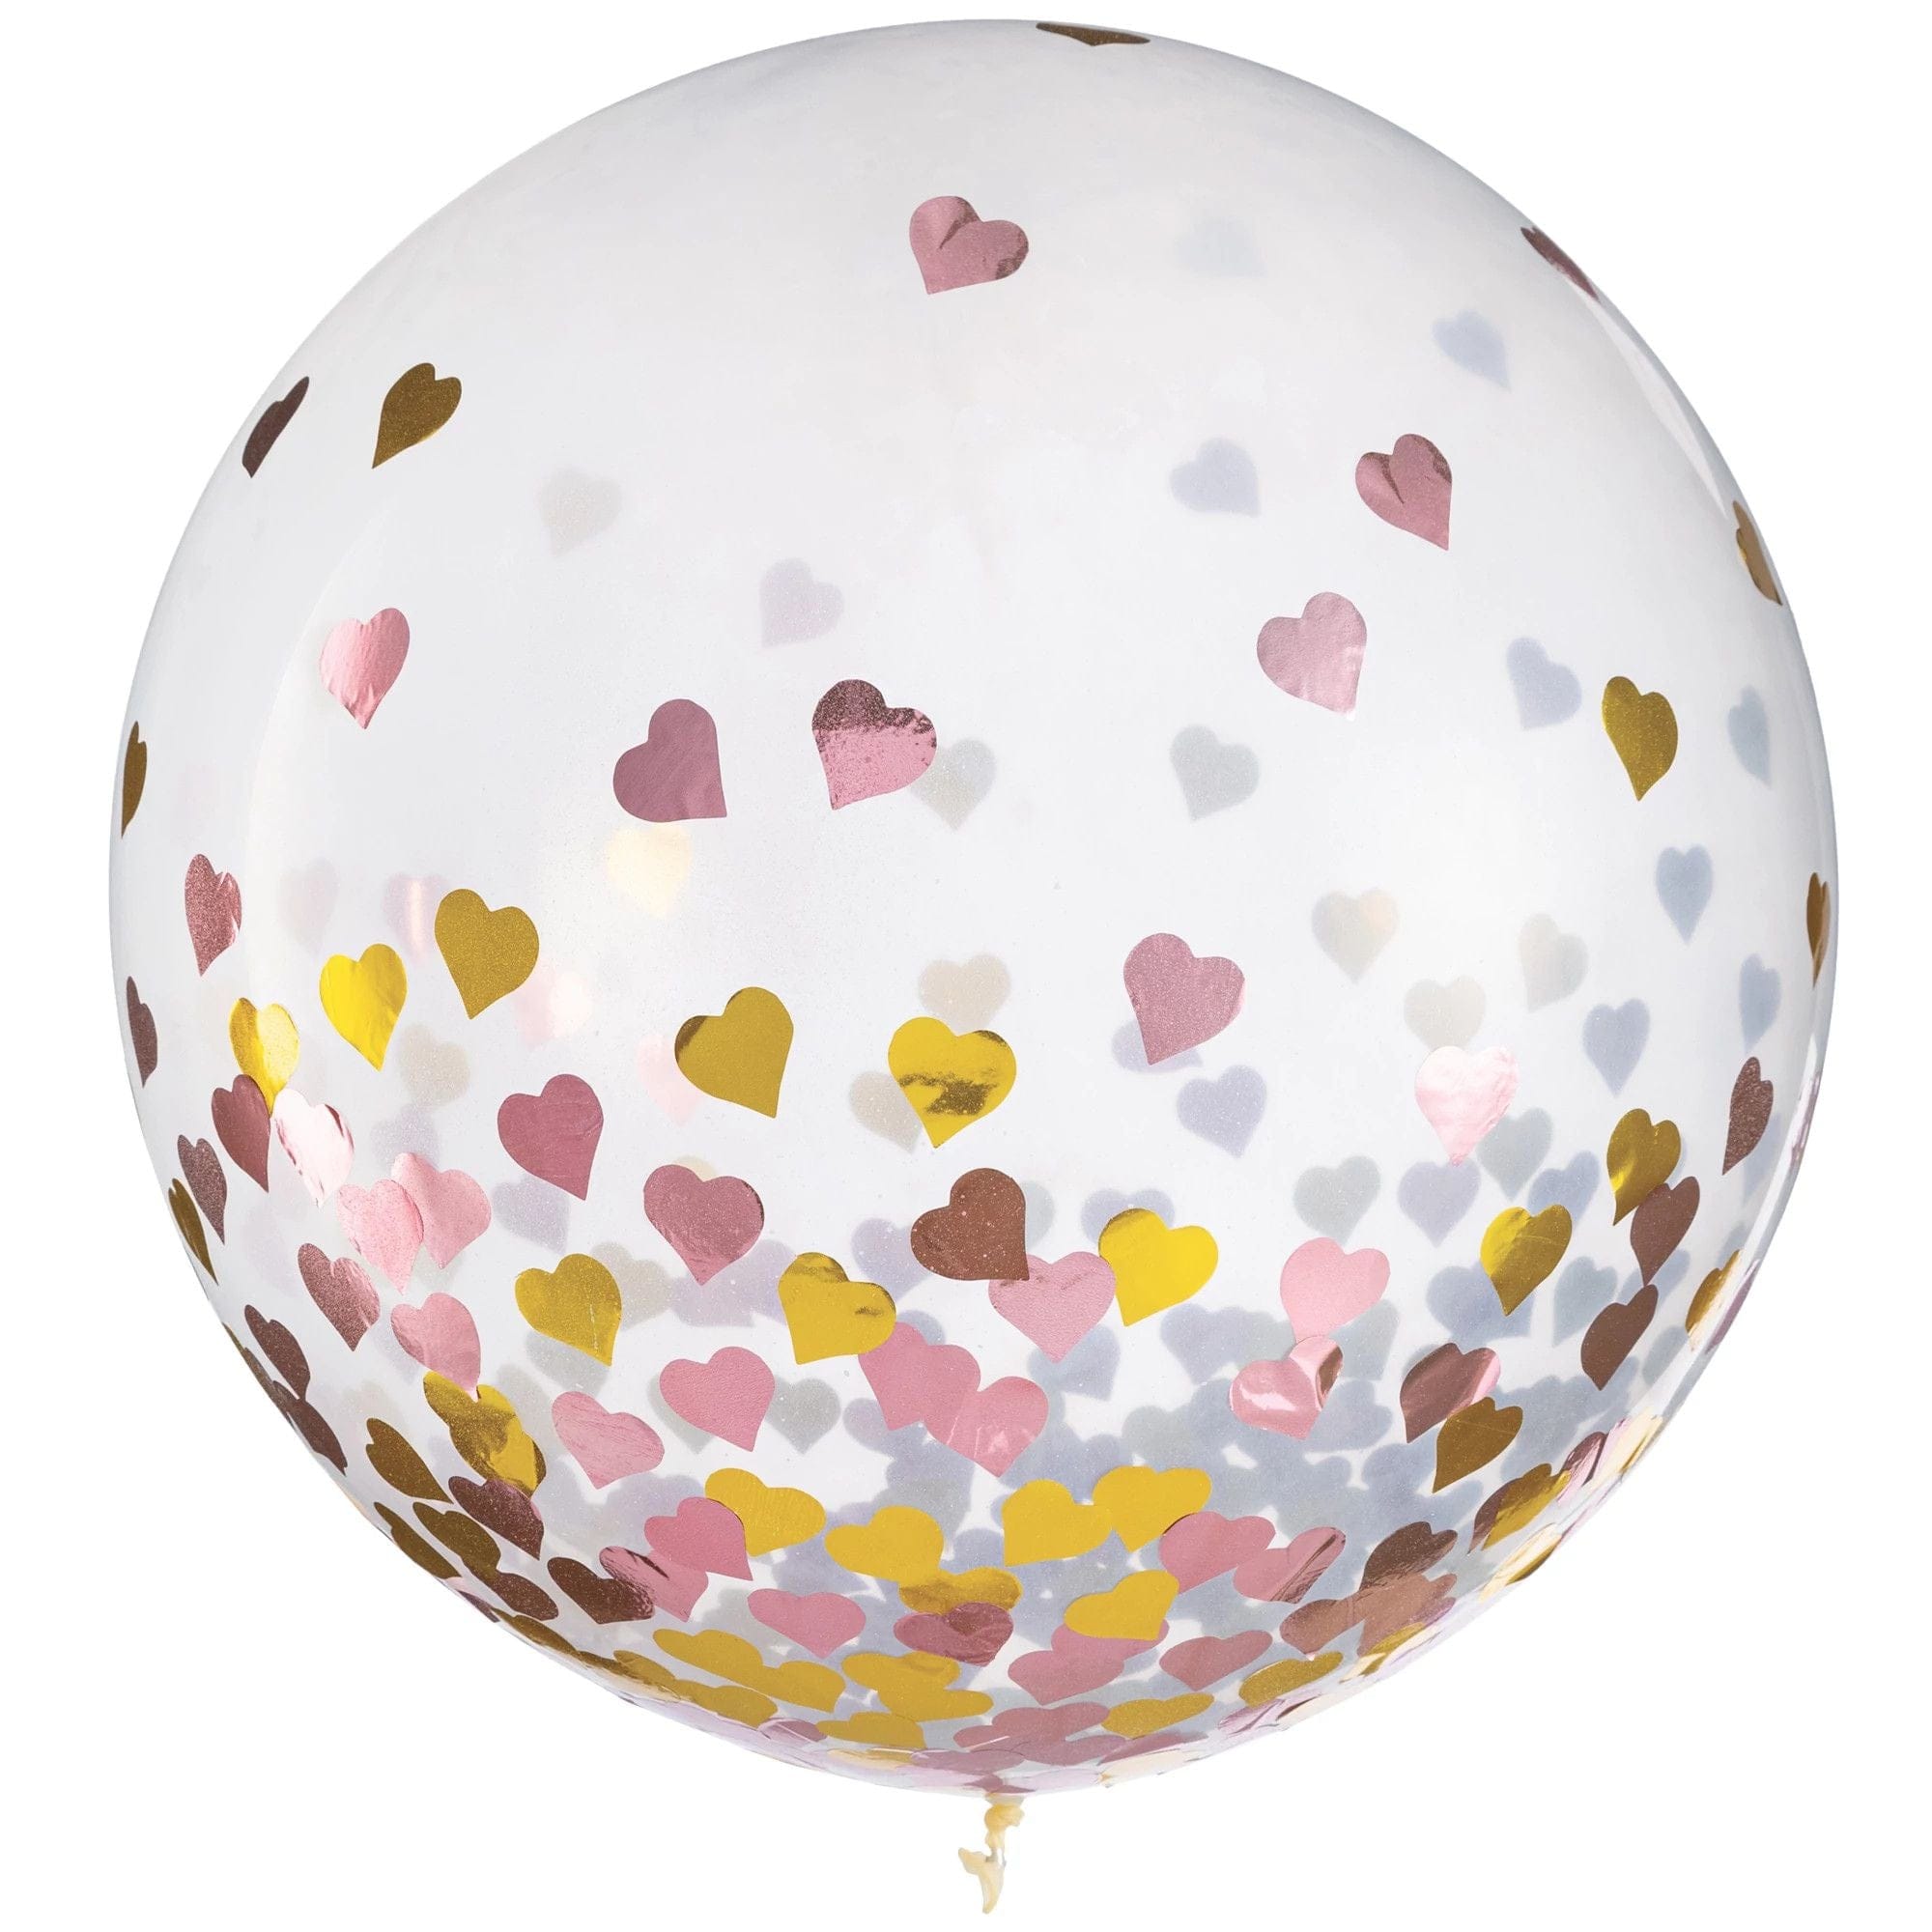 Amscan 2ct, 24in, Metallic Gold & Pink Heart Confetti Balloons